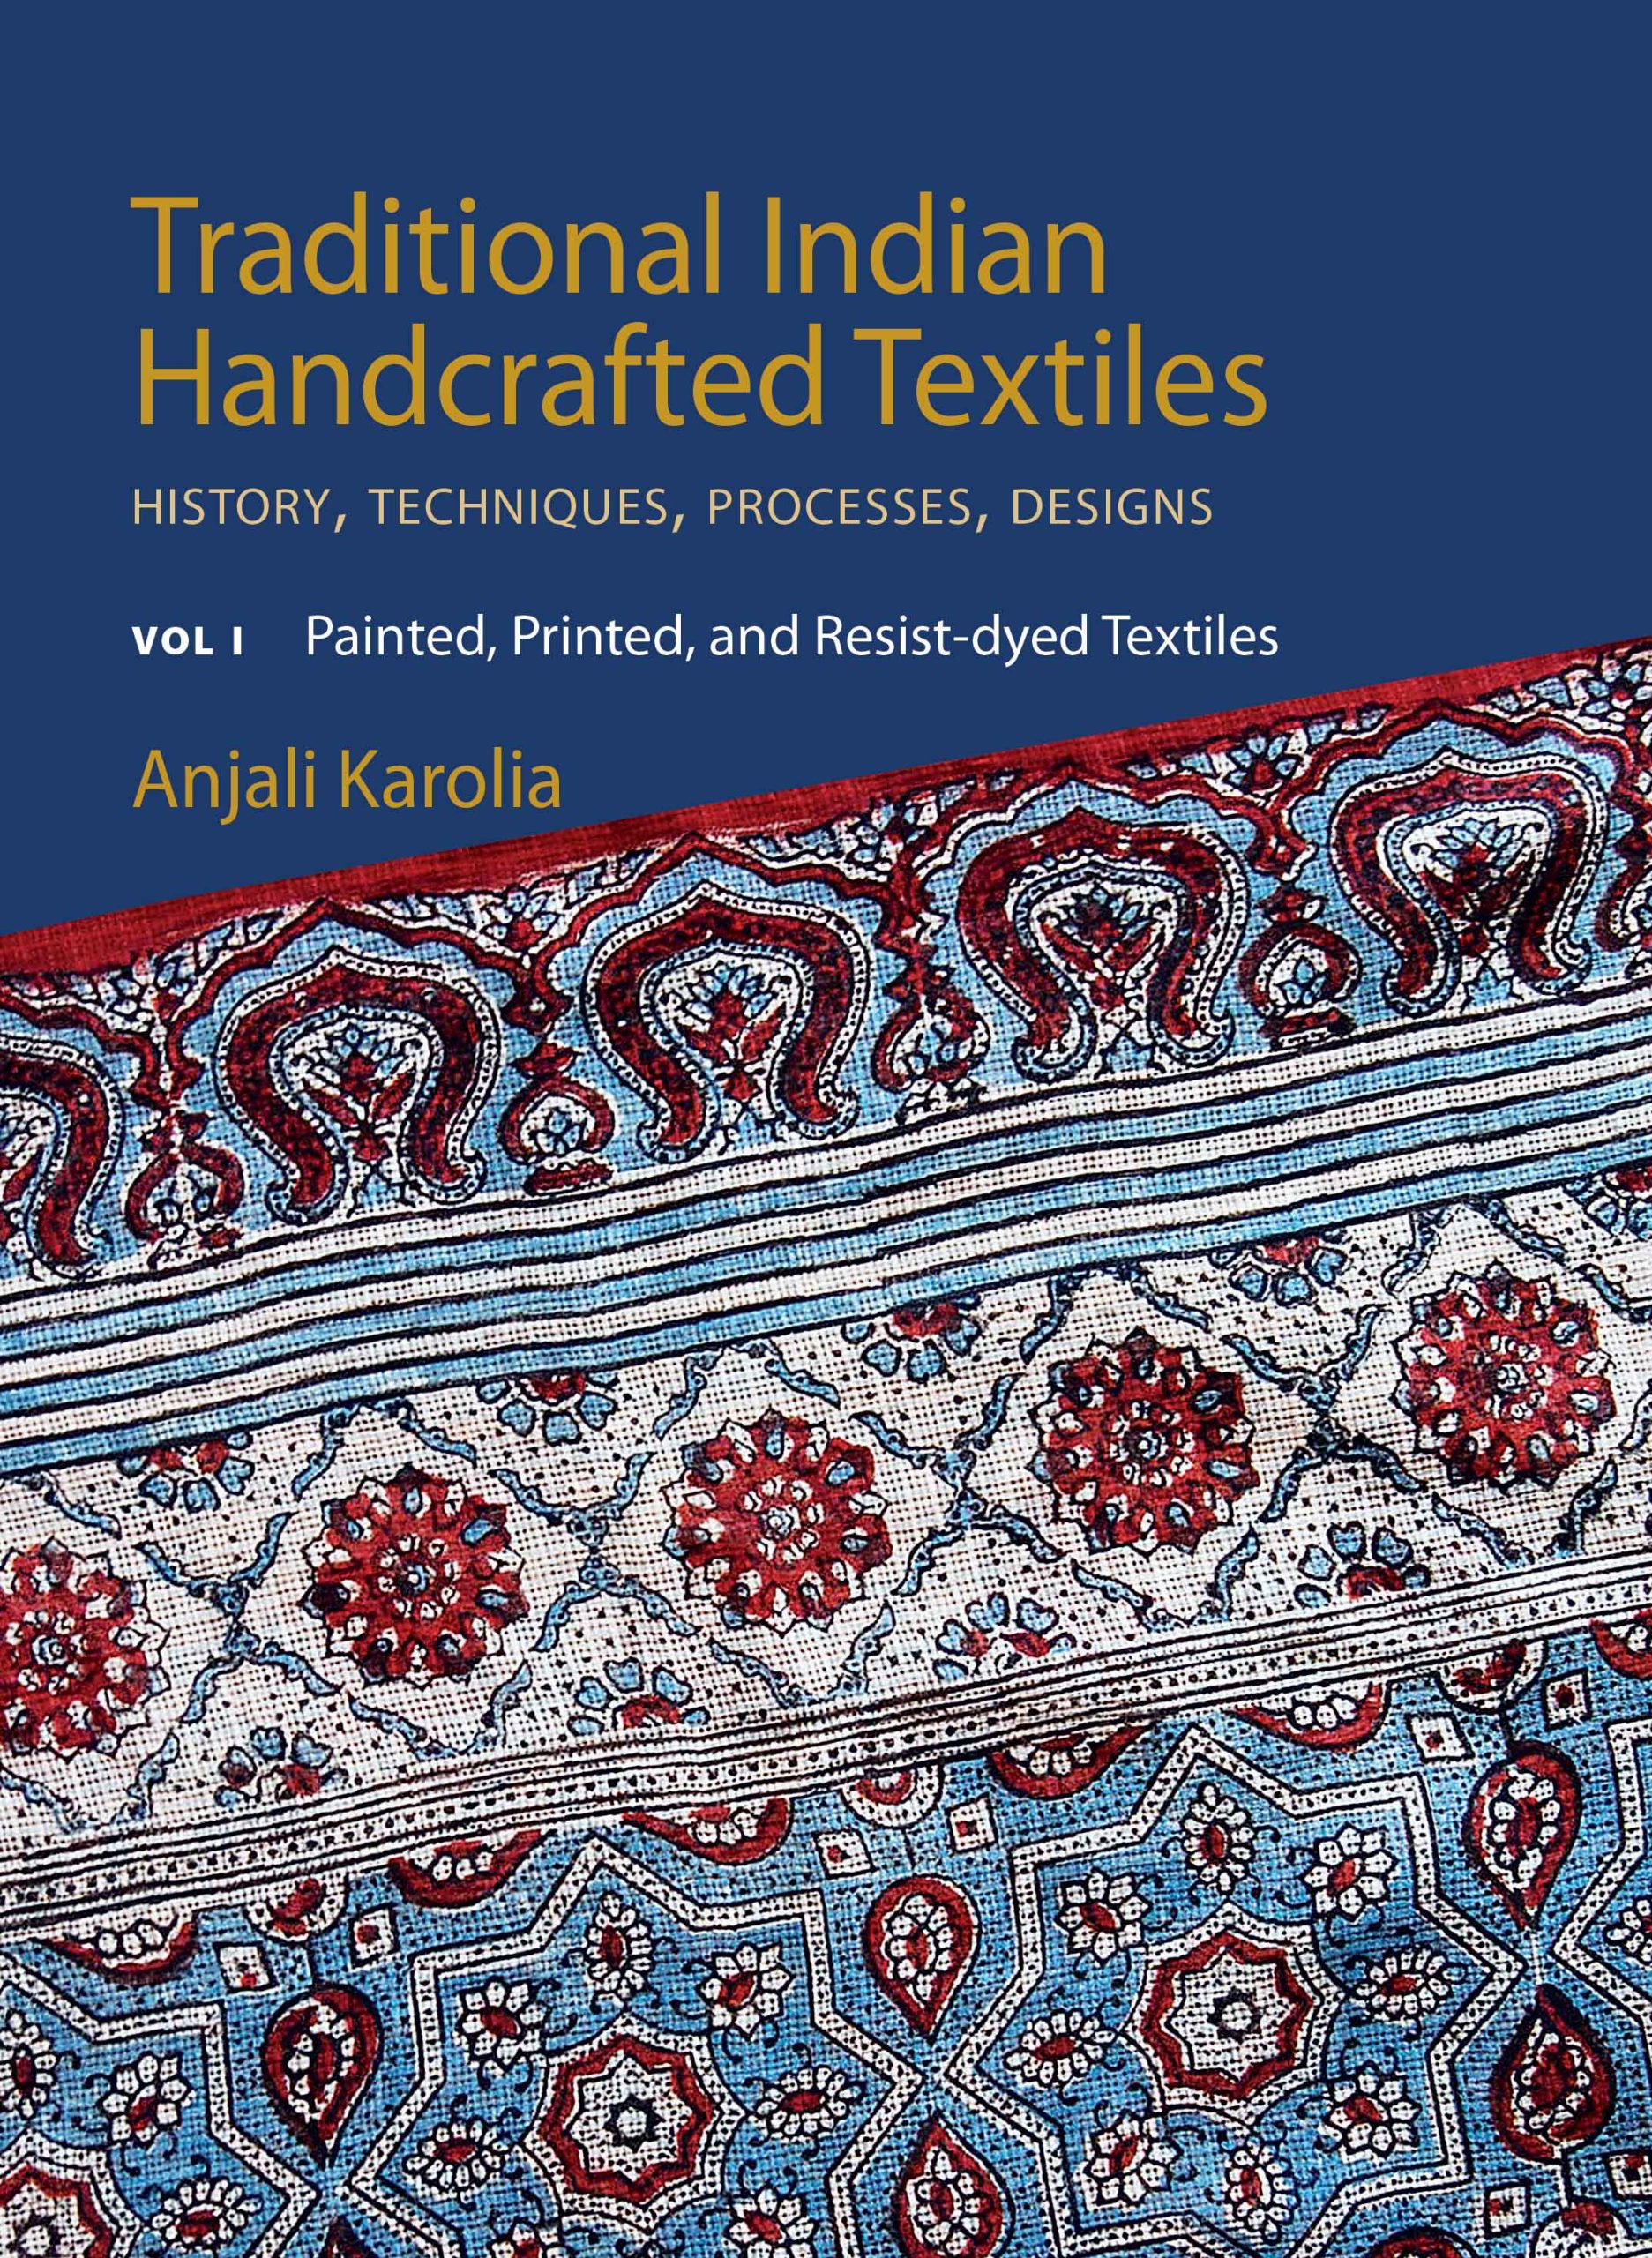 Traditional Indian Handcrafted Textiles History Techniques Processes and Designs Vol WEB scaled